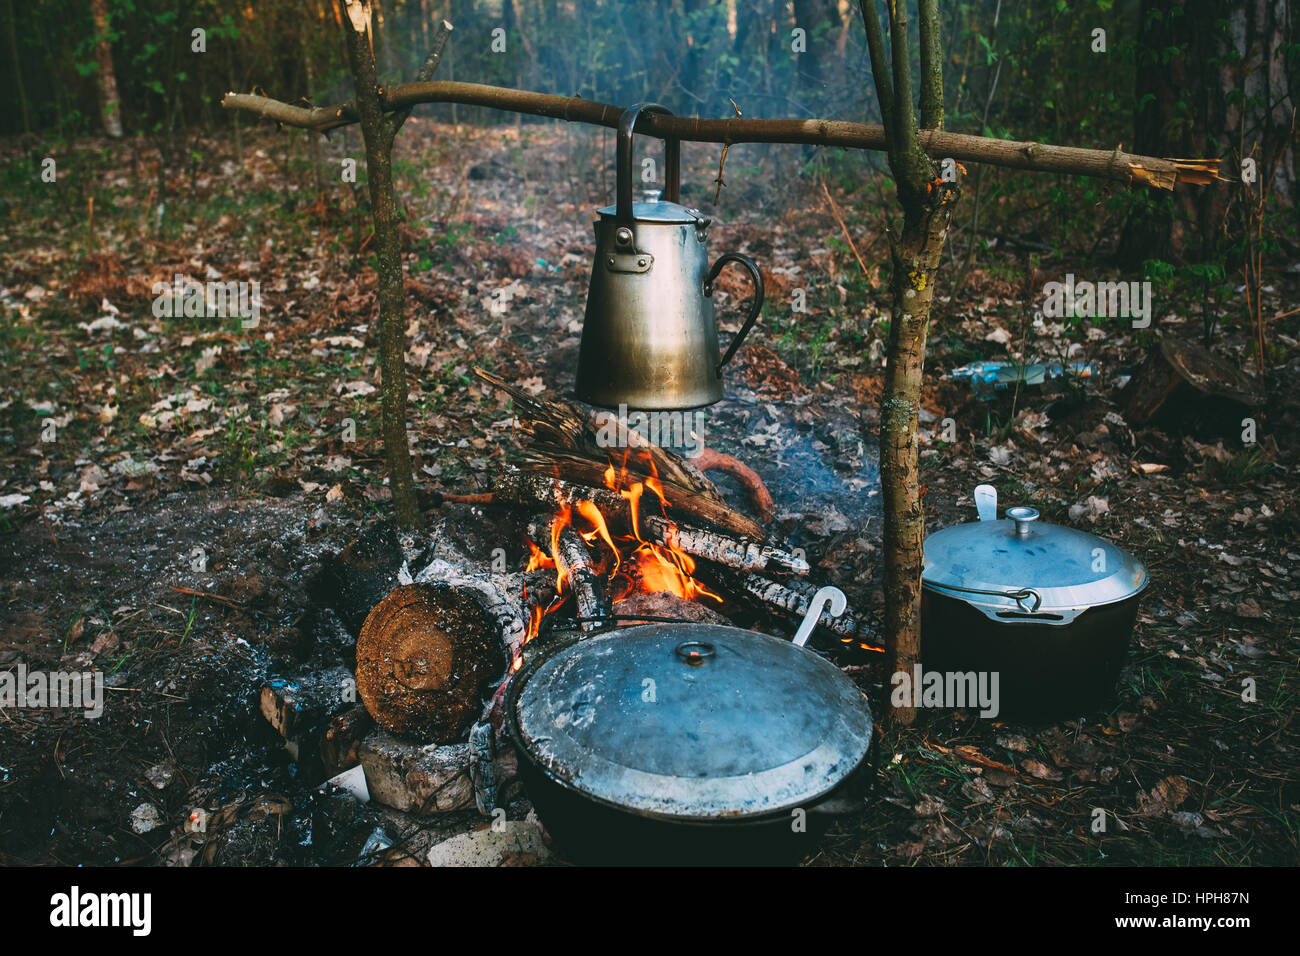 Old Retro Iron Camp Kettle And Pans Boils Water On A Fire In Forest. Bright Flame Fire Bonfire At Dusk Night. Stock Photo